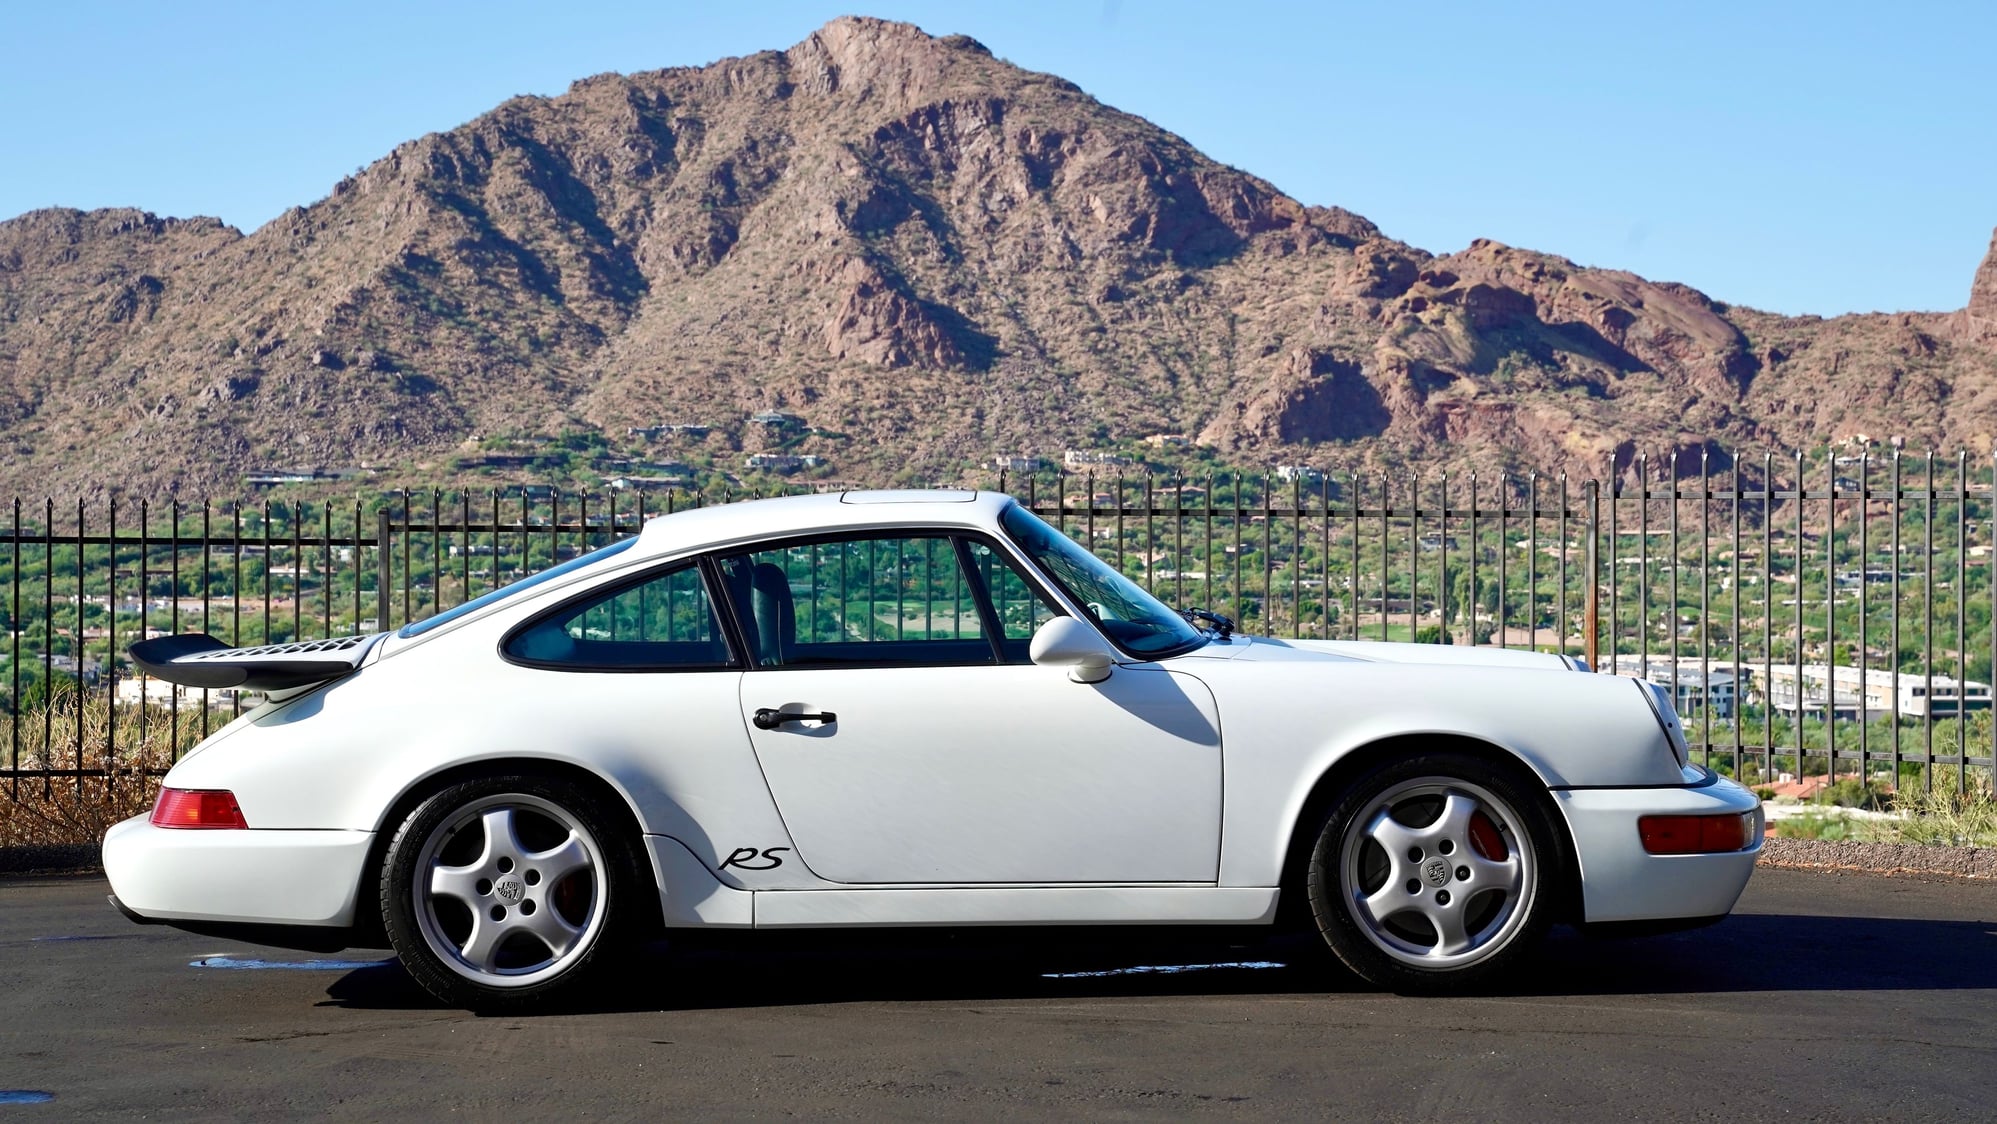 1993 Porsche 911 -  - Used - VIN WP0AB2969PS419321 - 94,600 Miles - 6 cyl - 2WD - Manual - Coupe - White - Phoenix, AZ 85013, United States